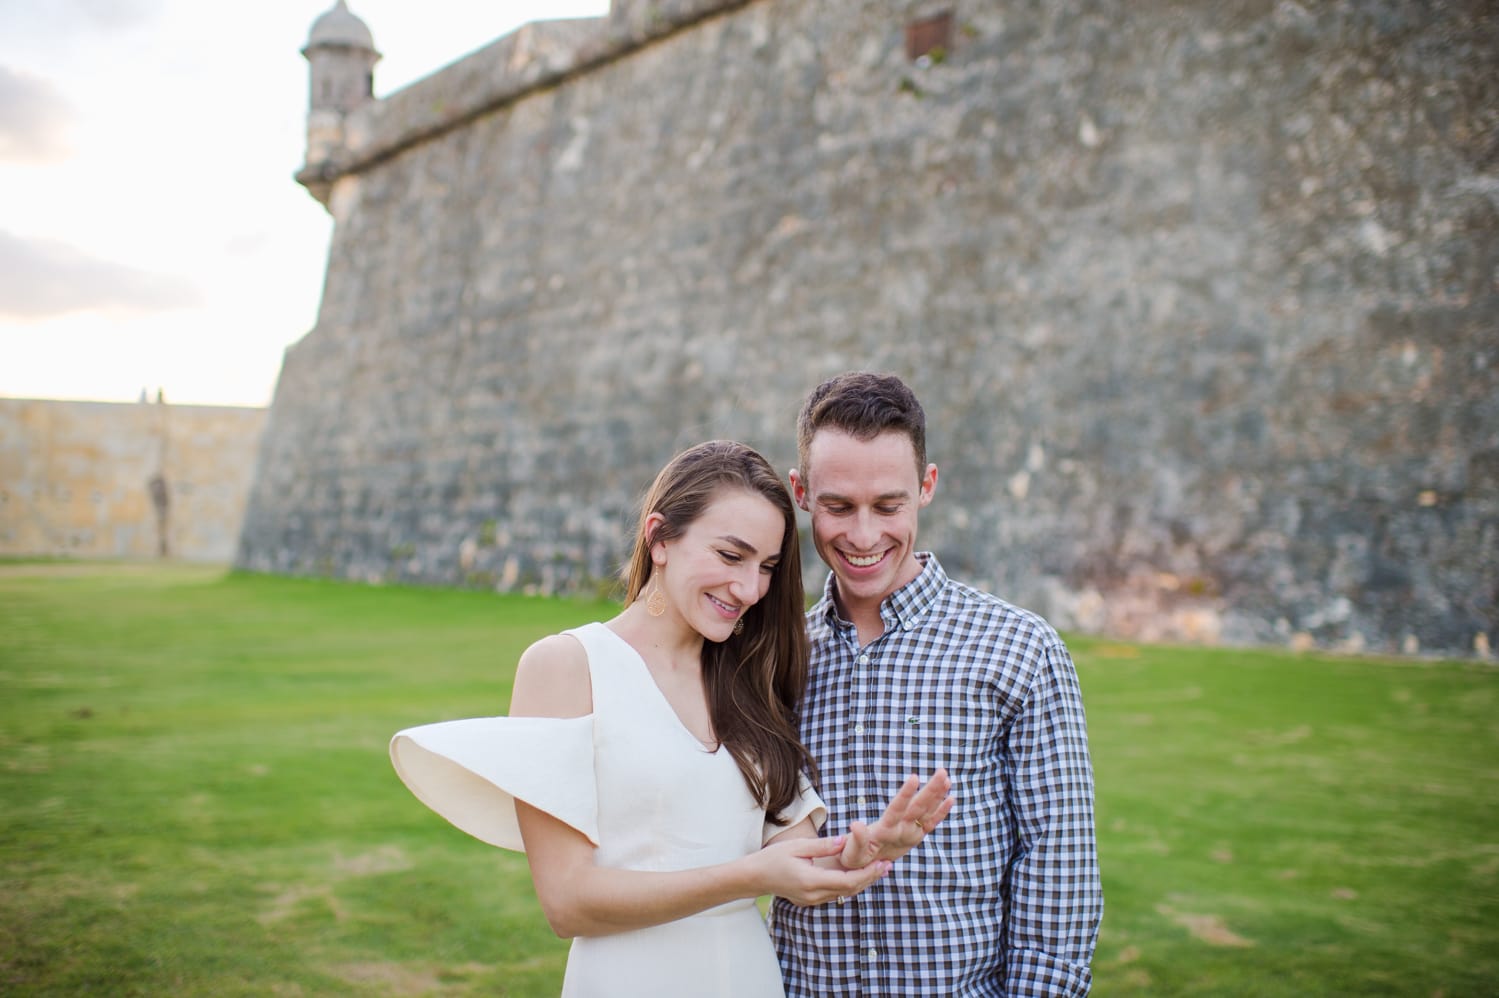 beautiful and simple marriage proposal in Old San Juan Puerto Rico by Camille Fontanez